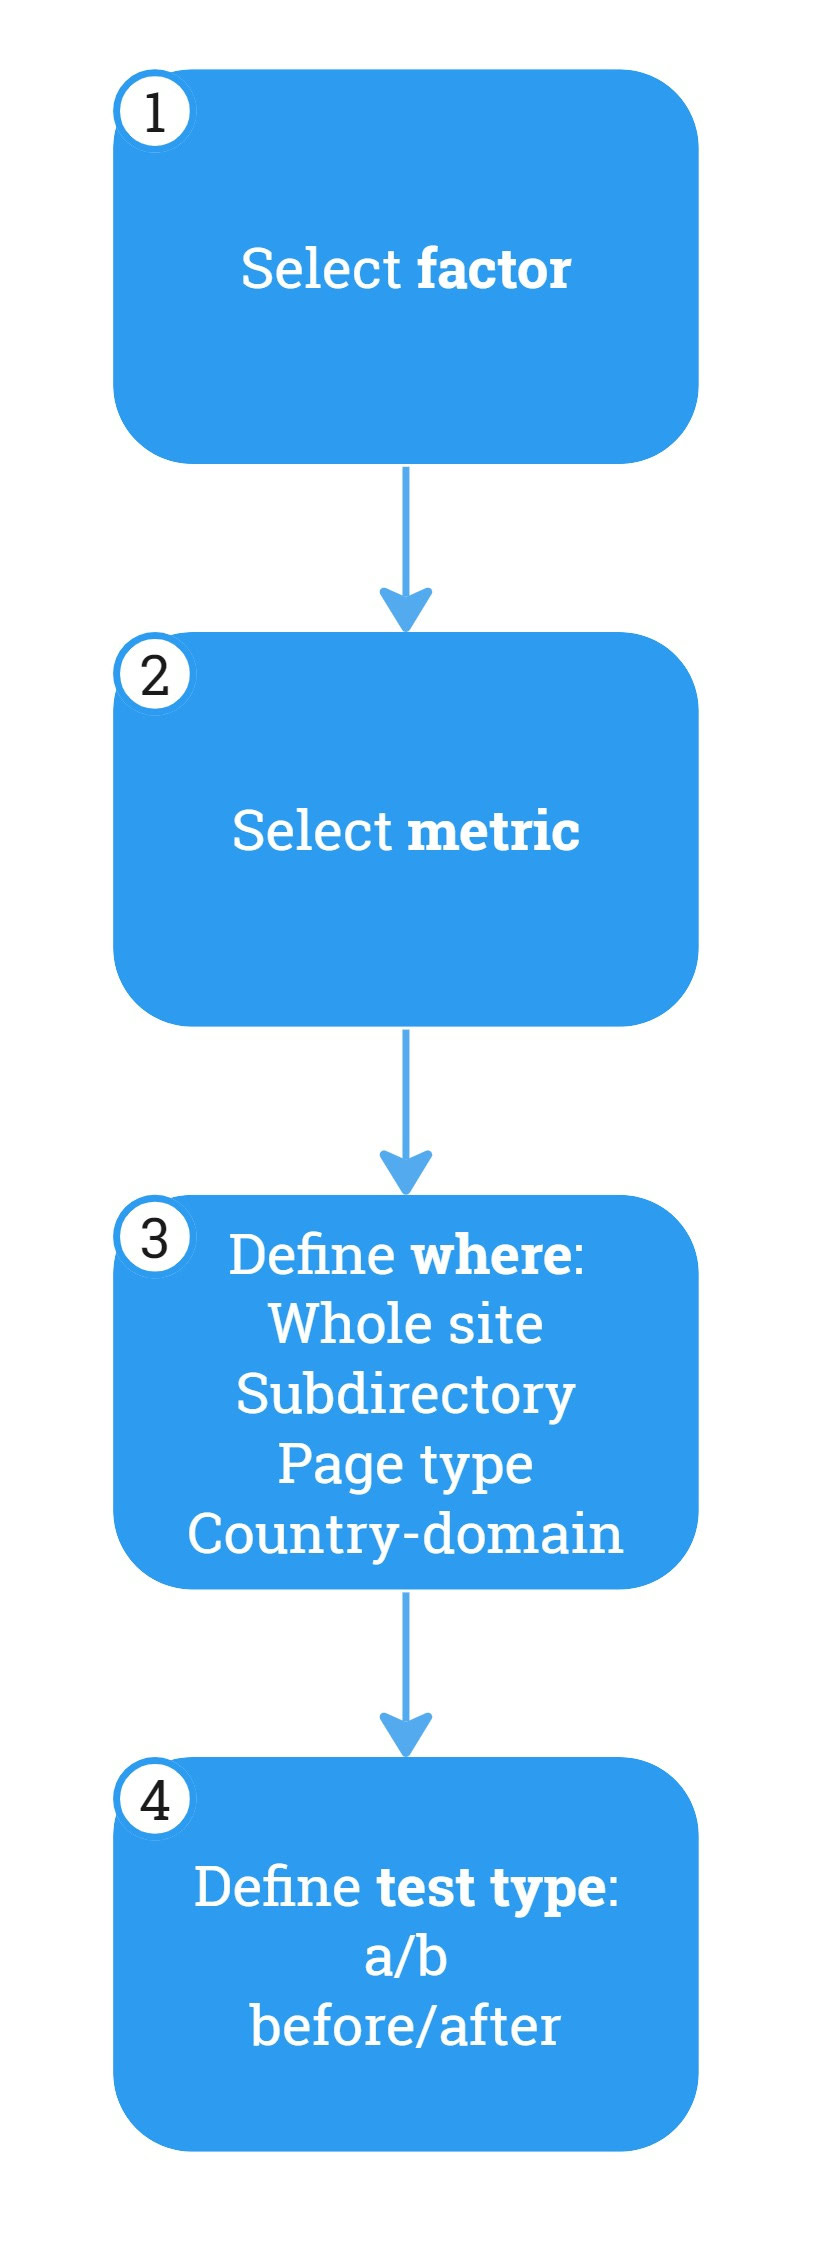 Flowchart detailing four steps of testing ranking factors systematically.